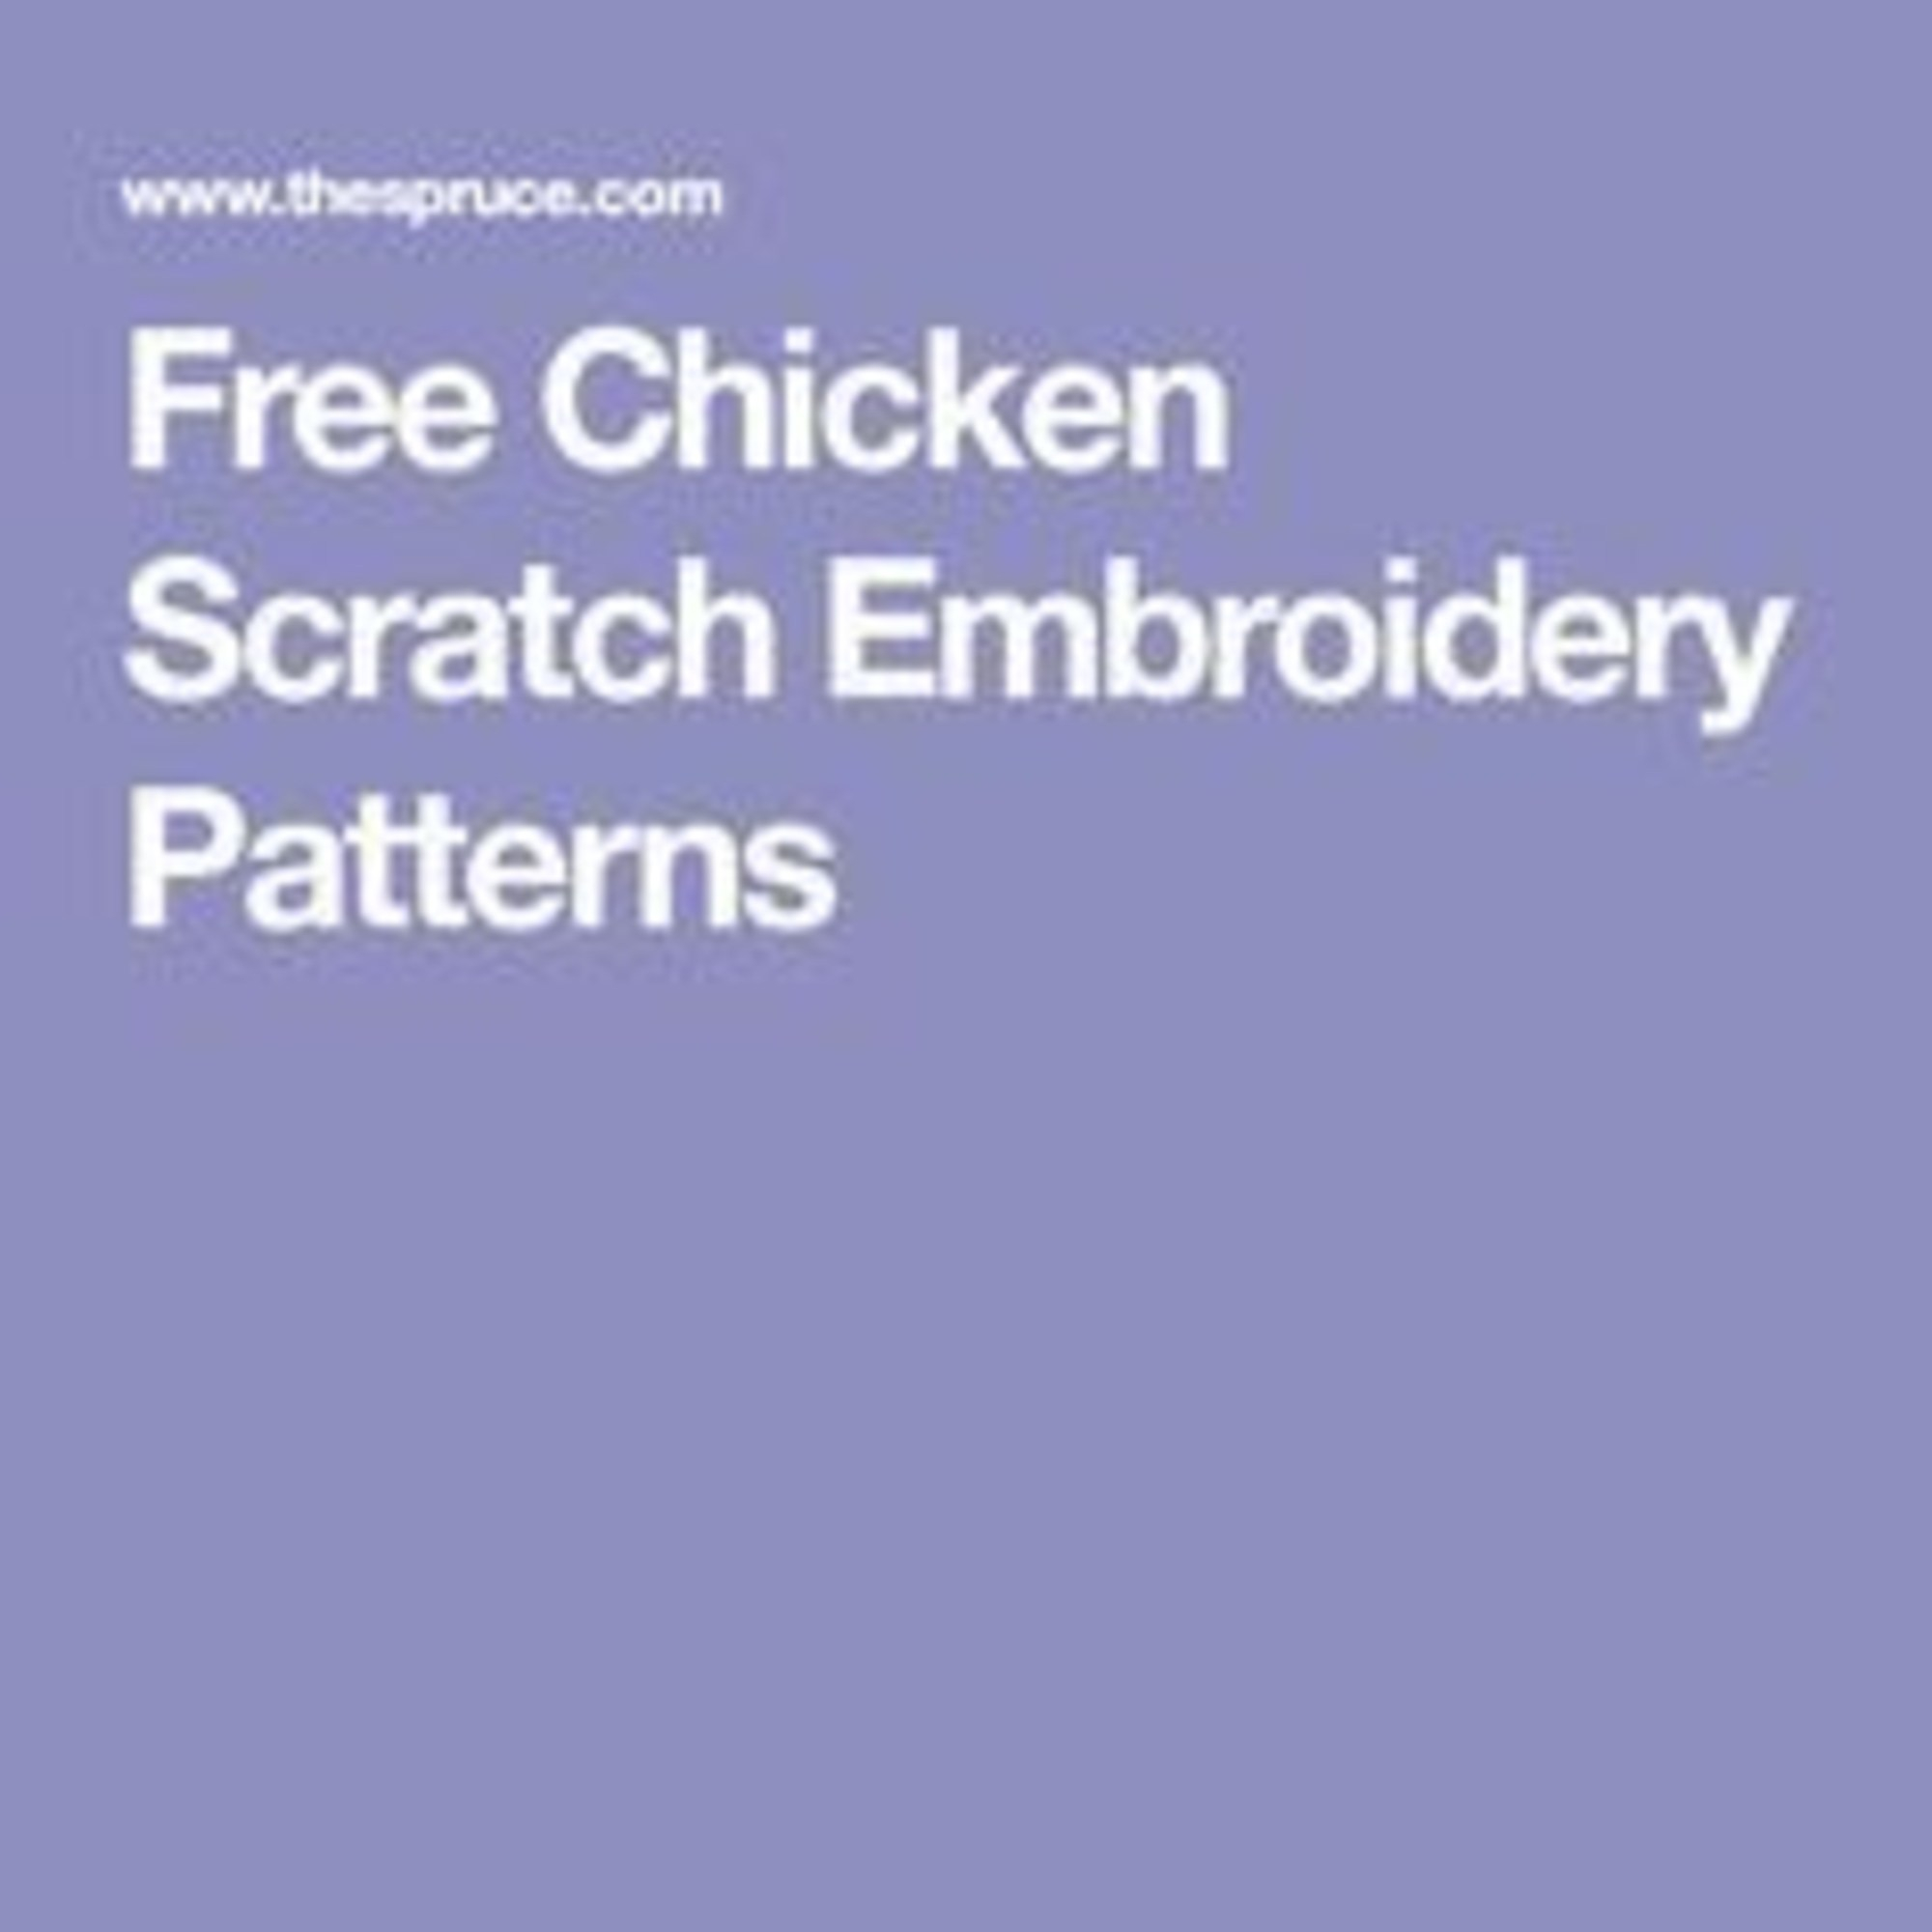 Chicken Embroidery Patterns All 39 Chicken Scratch Patterns Hd Wallpapers Pictpress